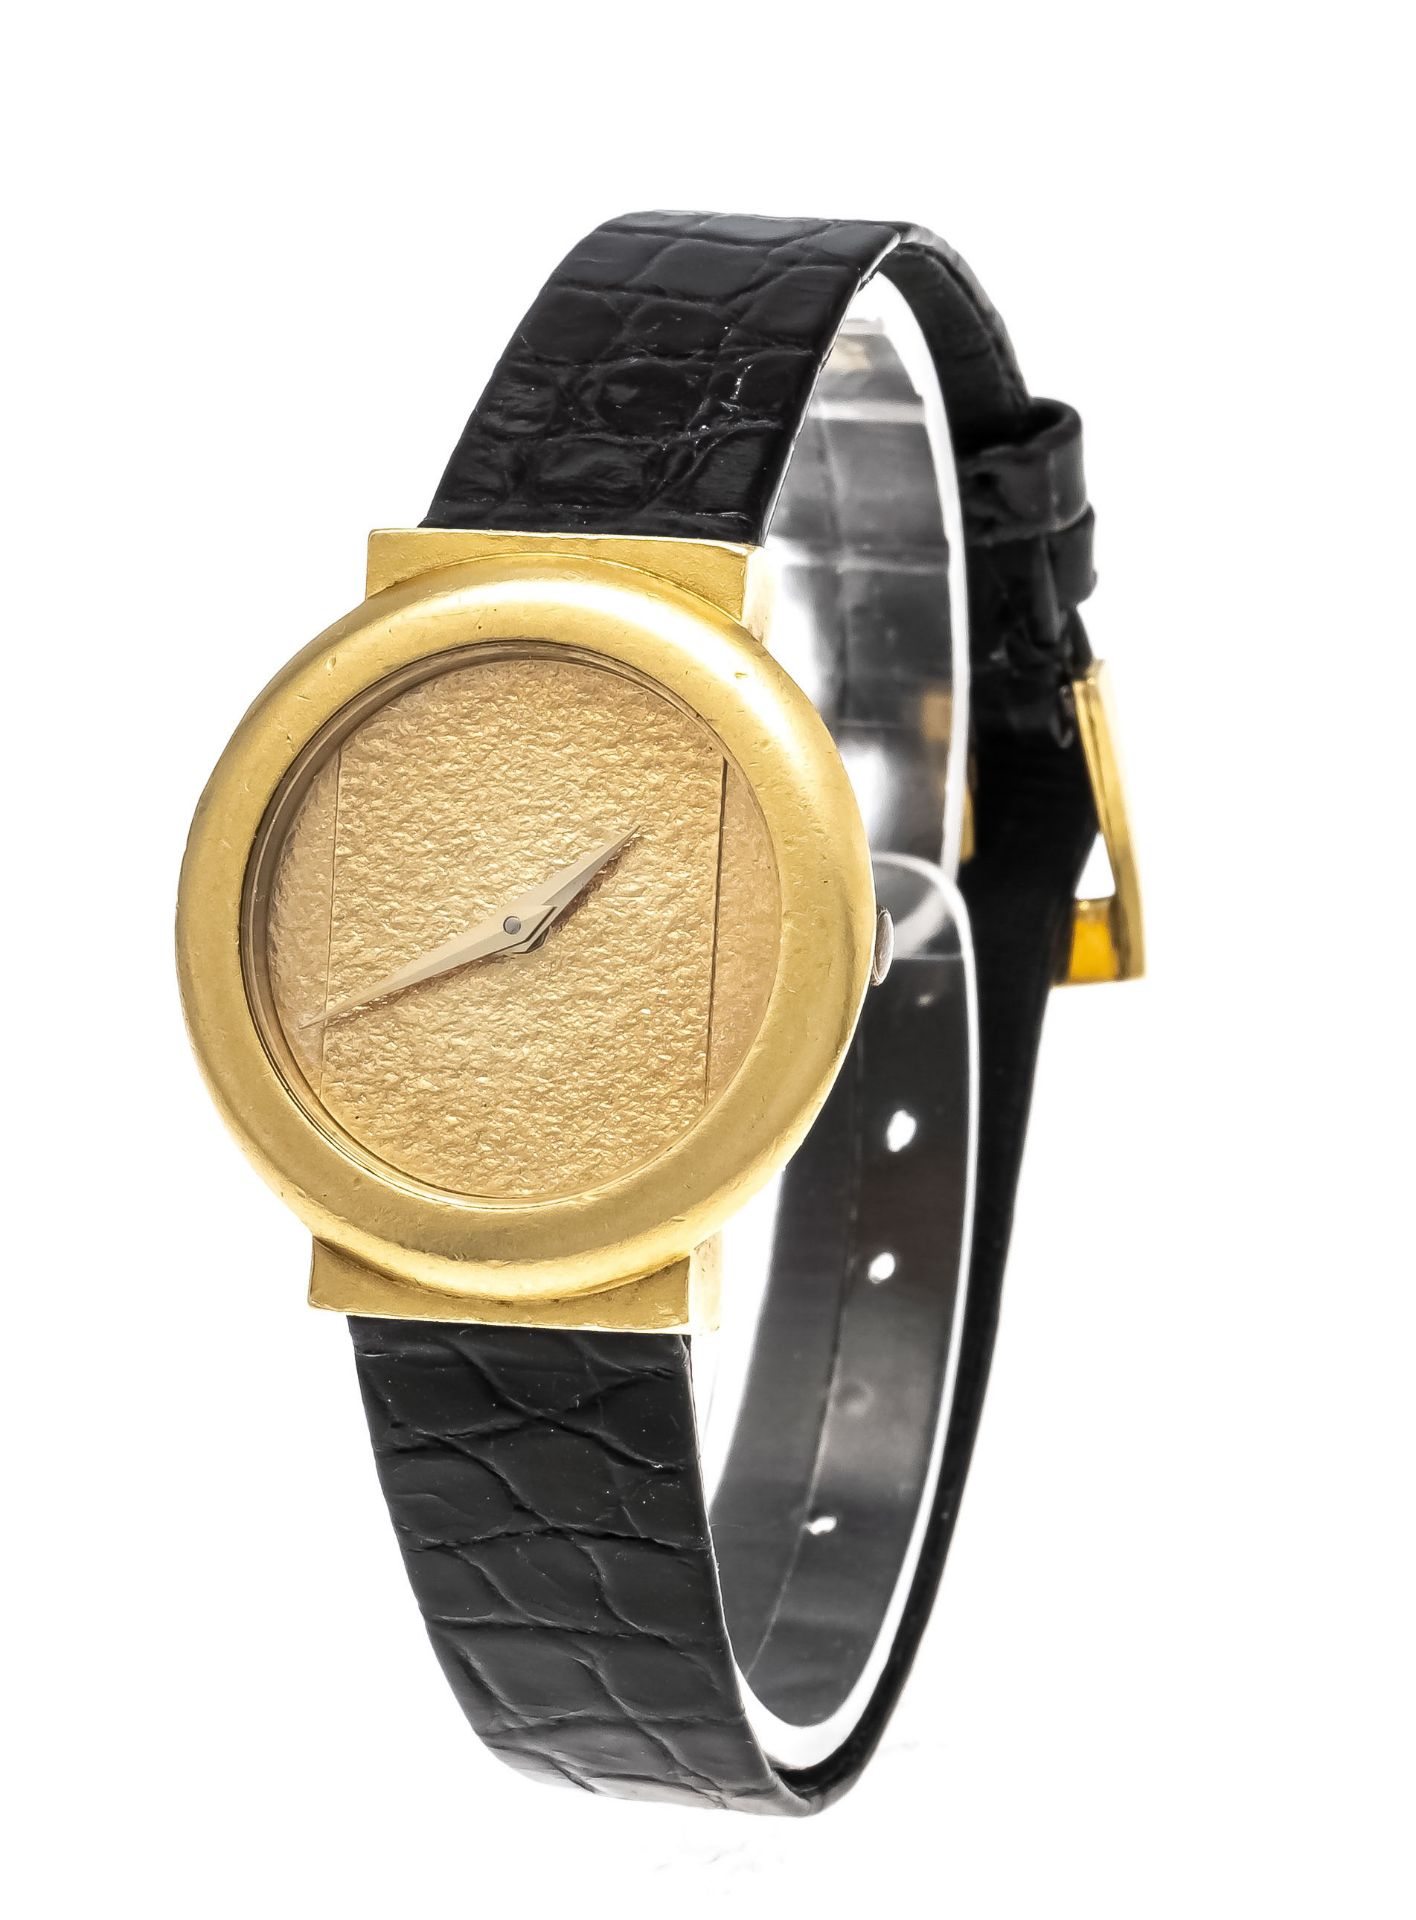 Ladies quartz watch CT Ref. 3752, 750/000 GG, polished case with traces of wear, fused gold dial,